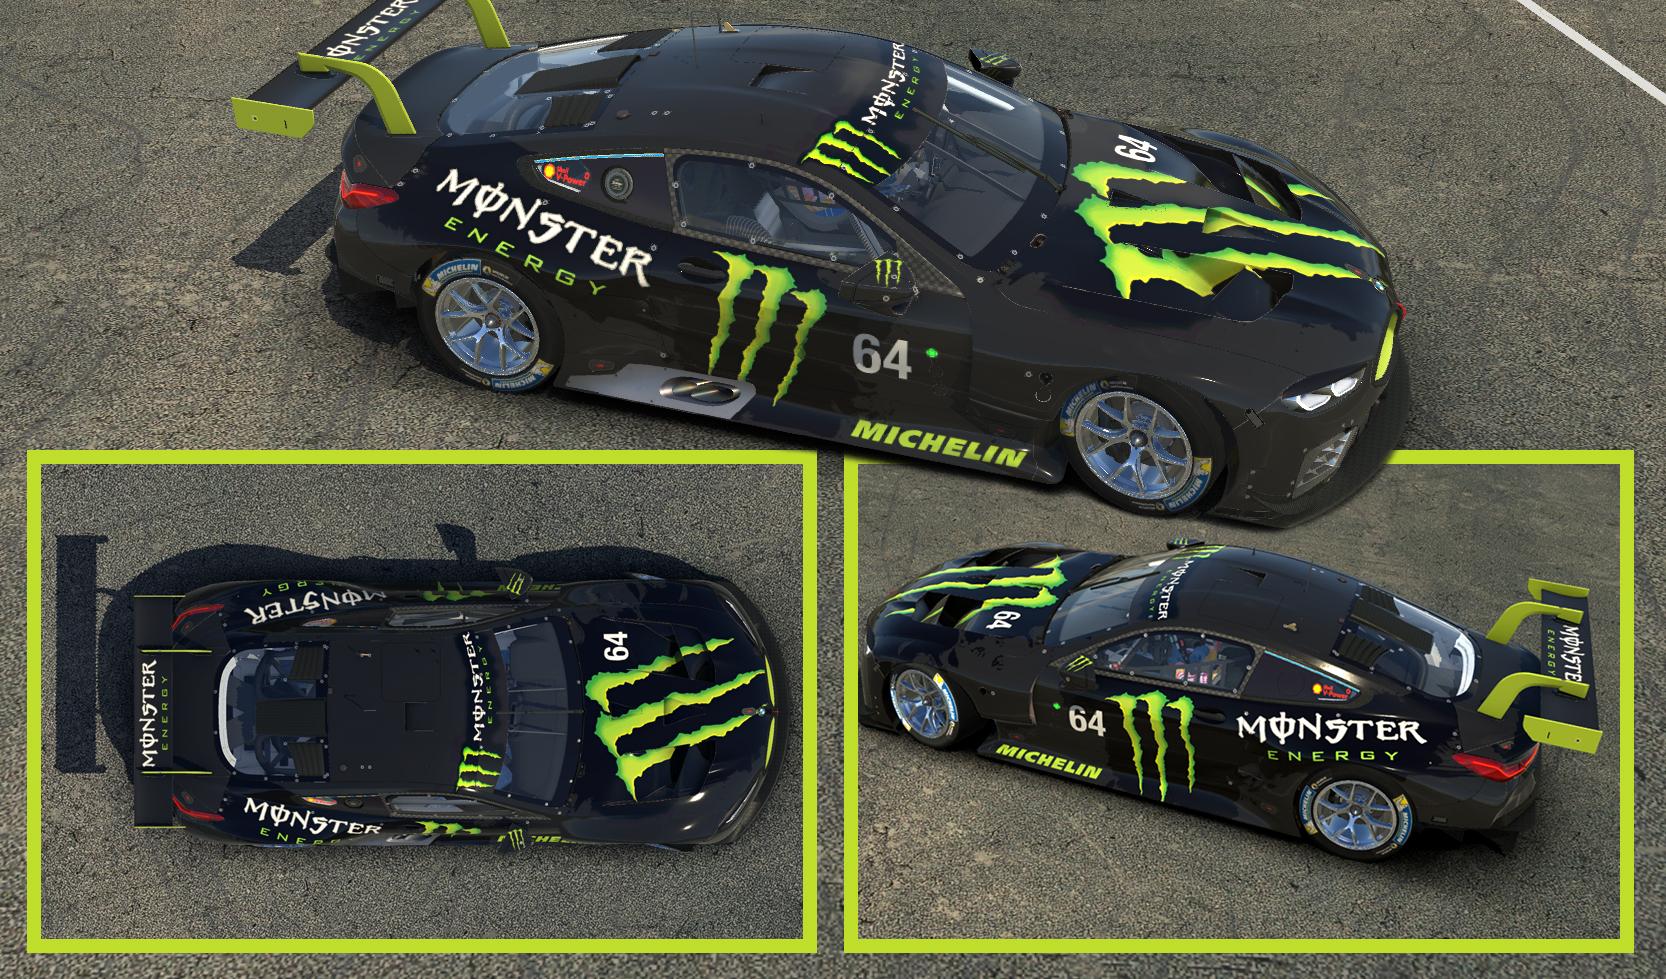 BMW M8 Monster by Clyde Coman - Trading Paints